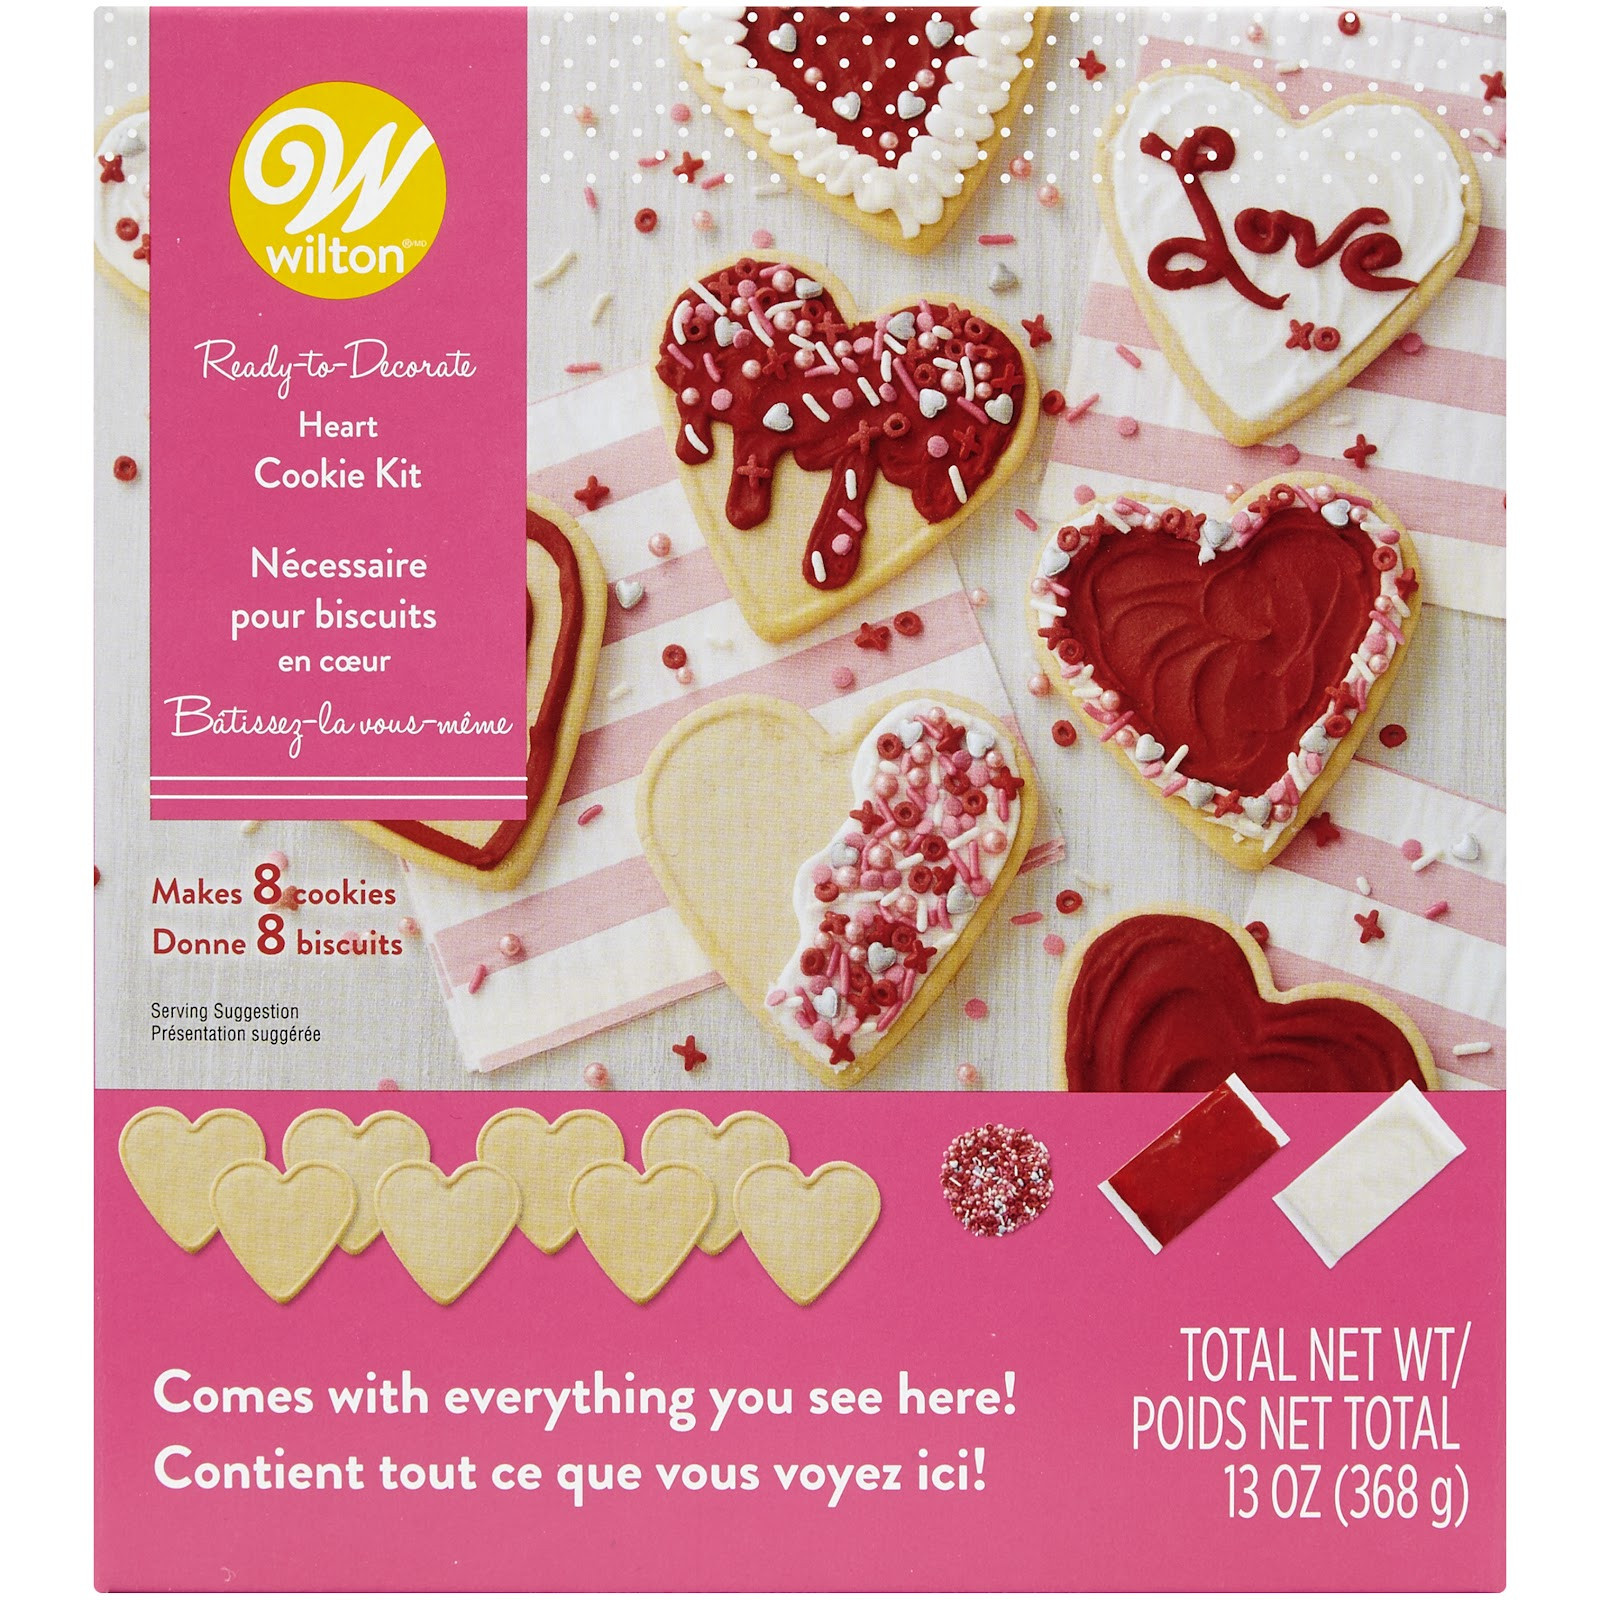 Valentines Day Cookies Delivery
 Wilton Valentine s Day Ready to Decorate Heart Cookie Kit